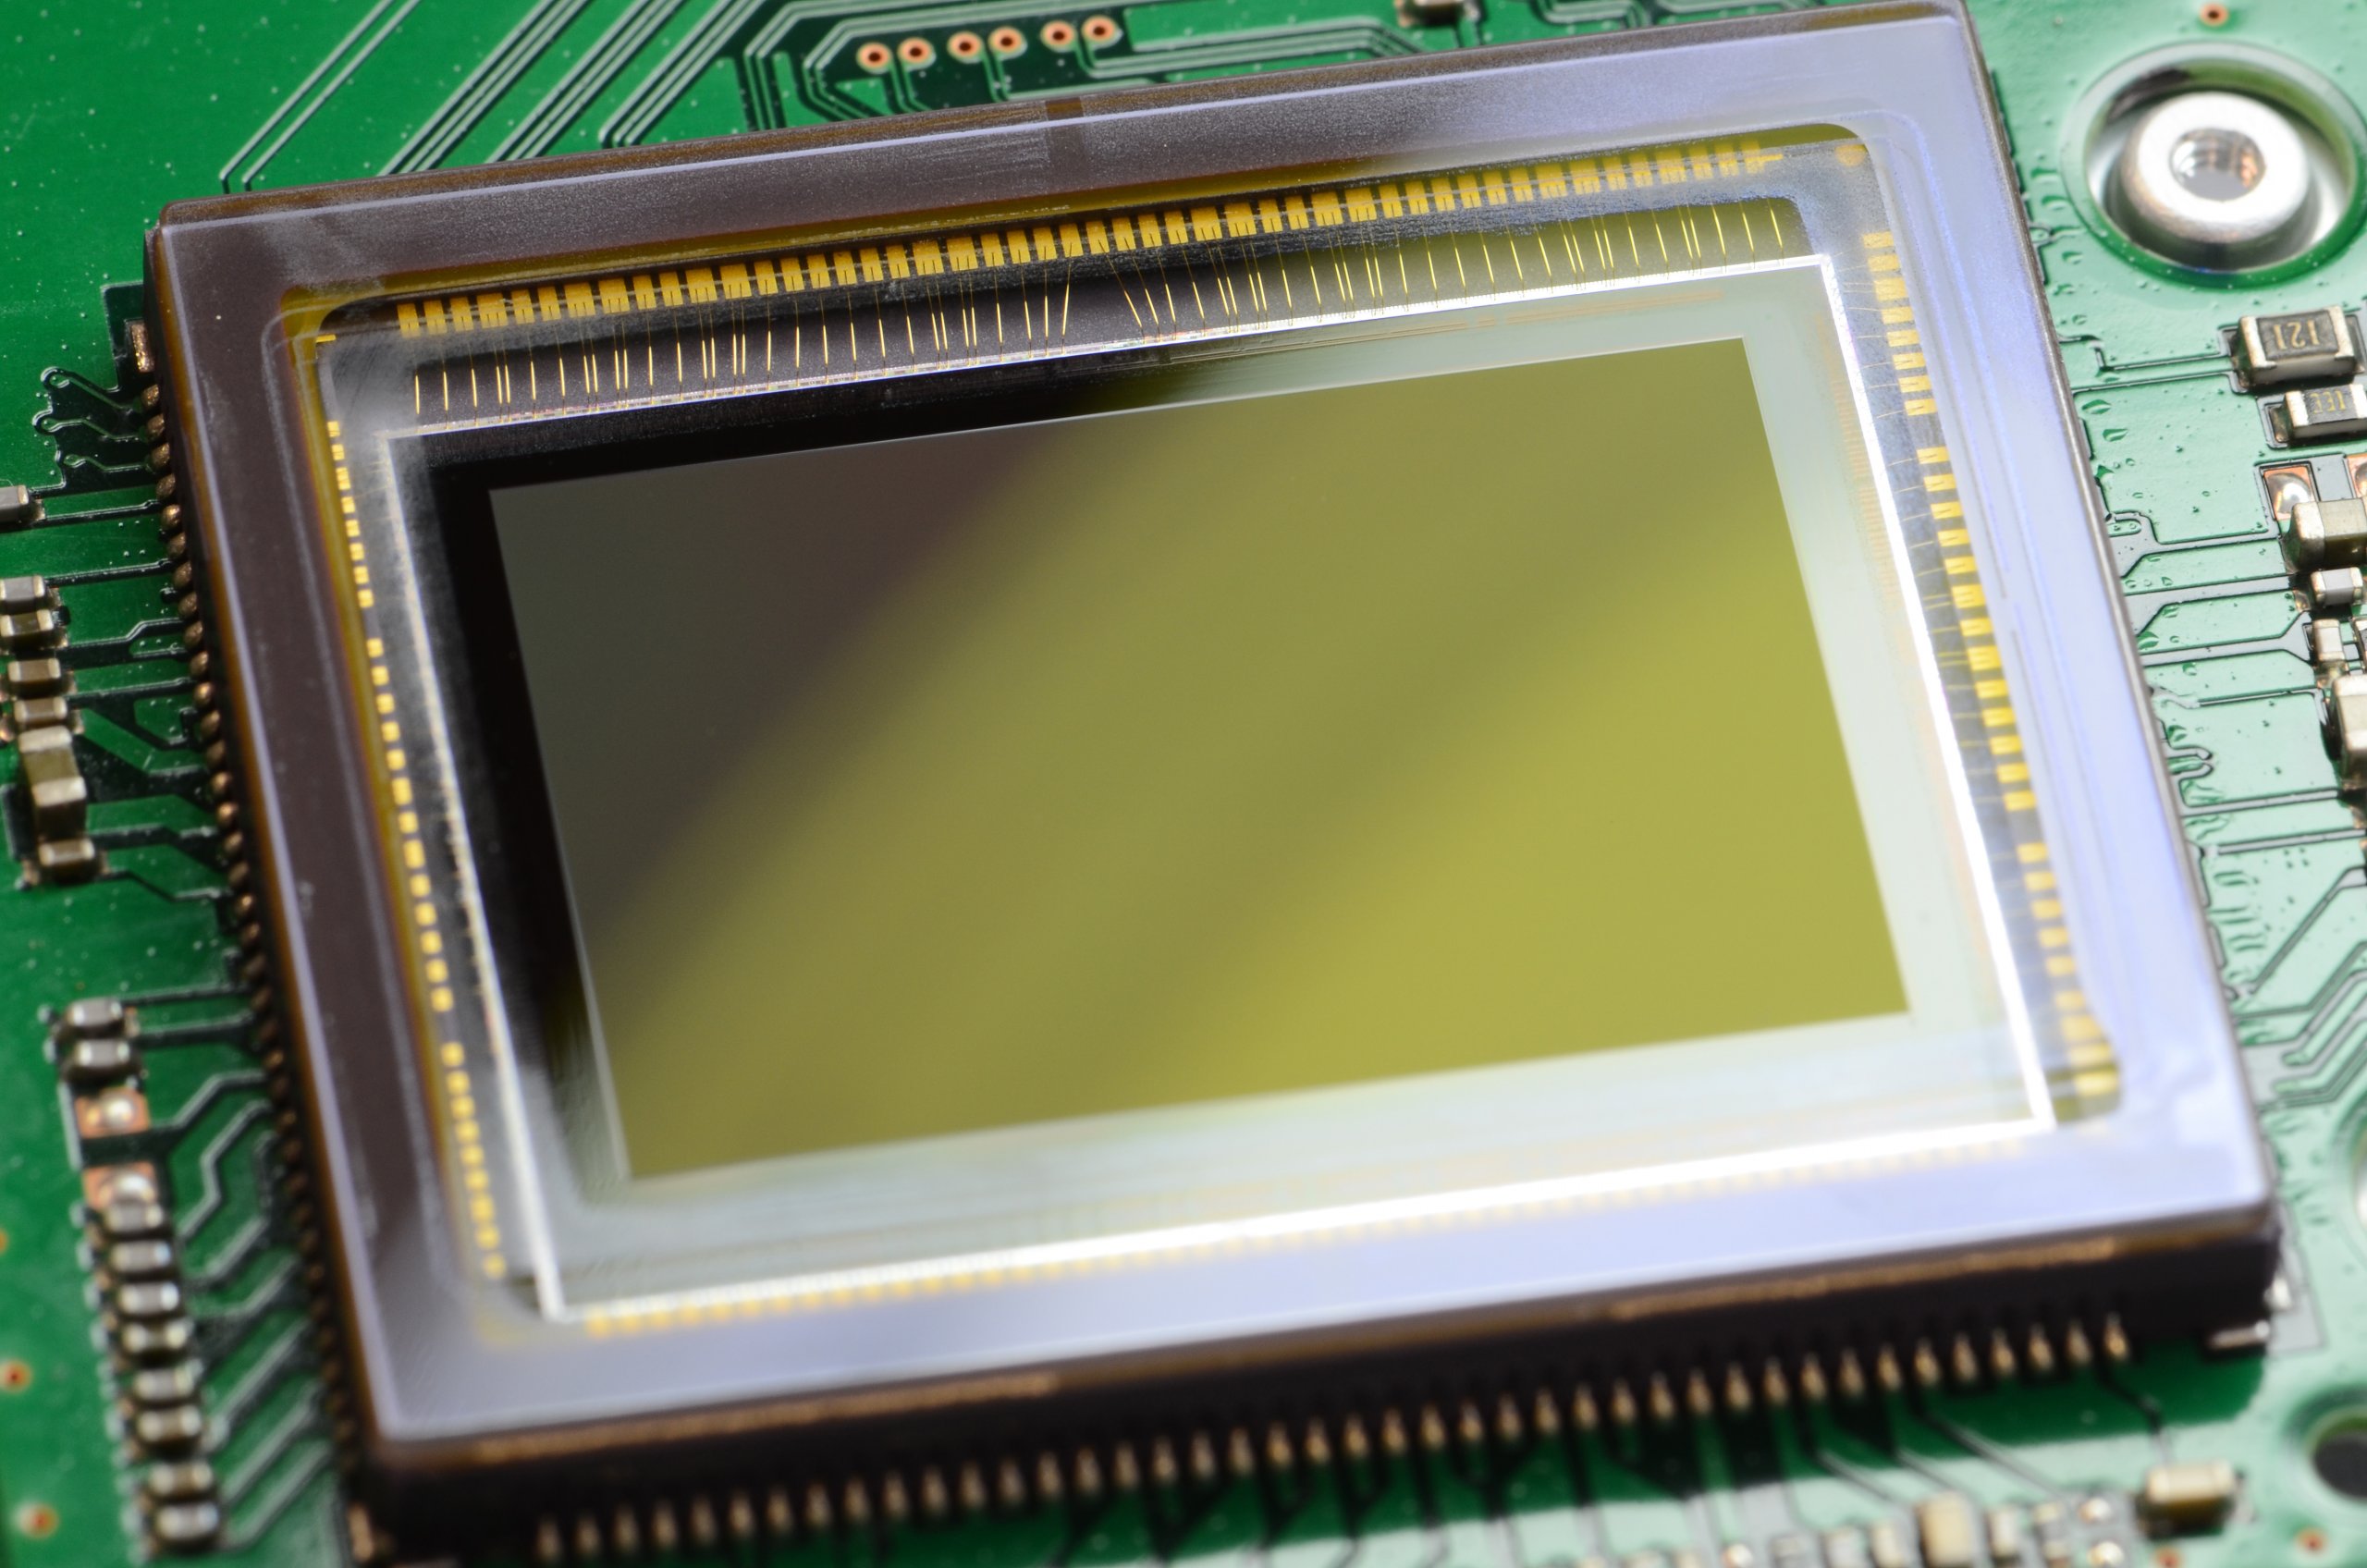 An image sensor for a digital camera, fitted into a circuit board.